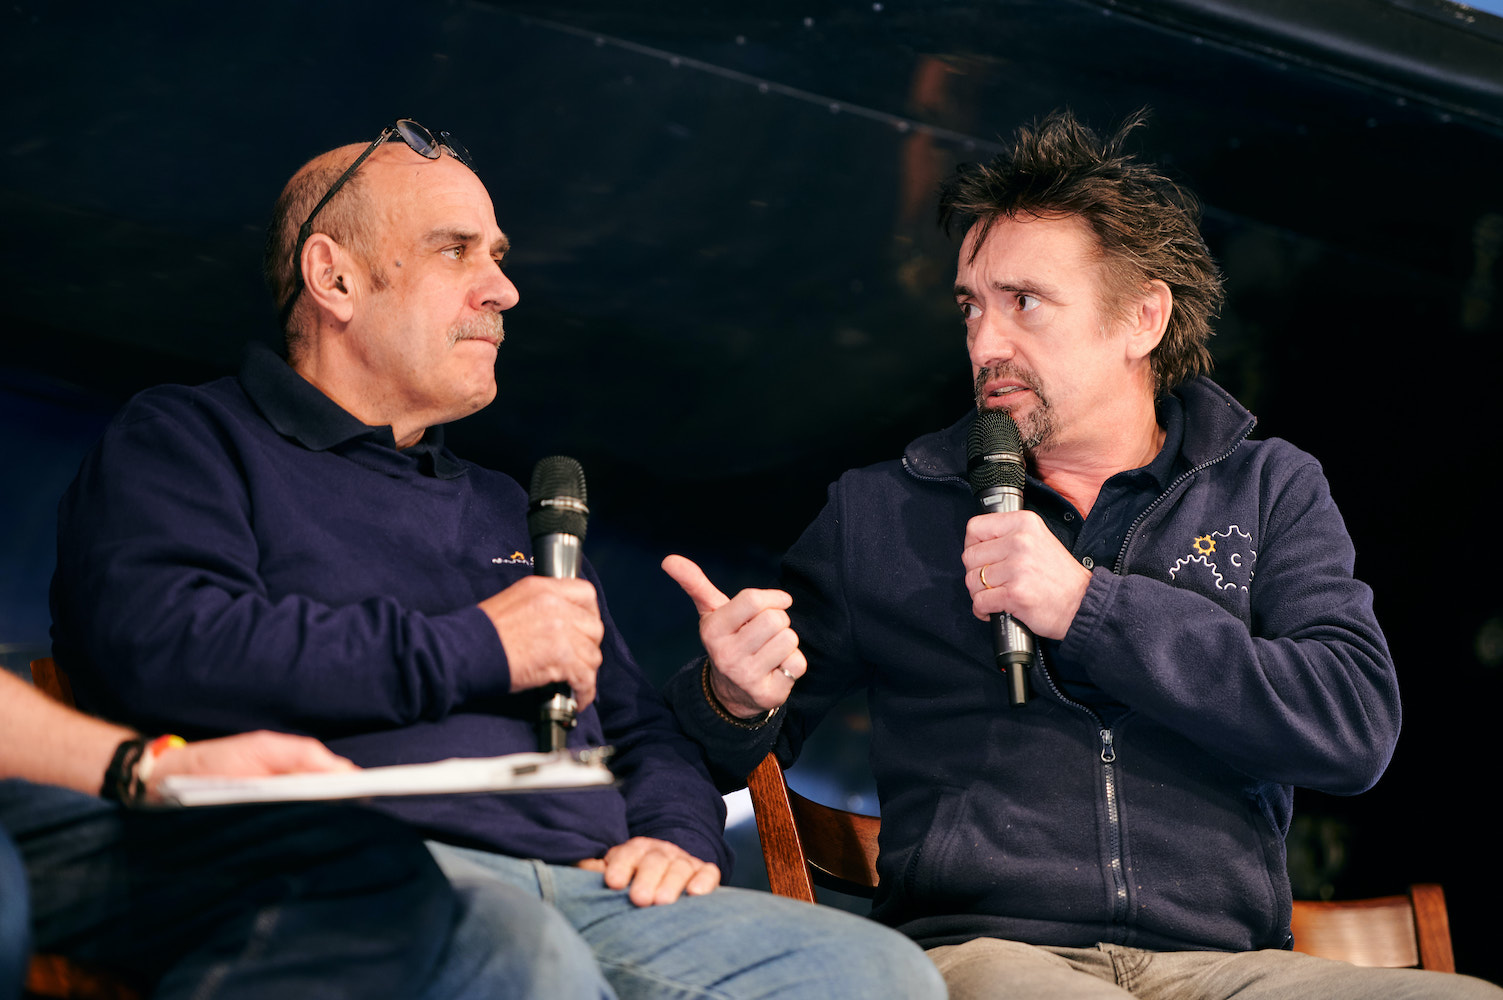 Richard Hammond and Neil Greenhouse from The Smallest Cog